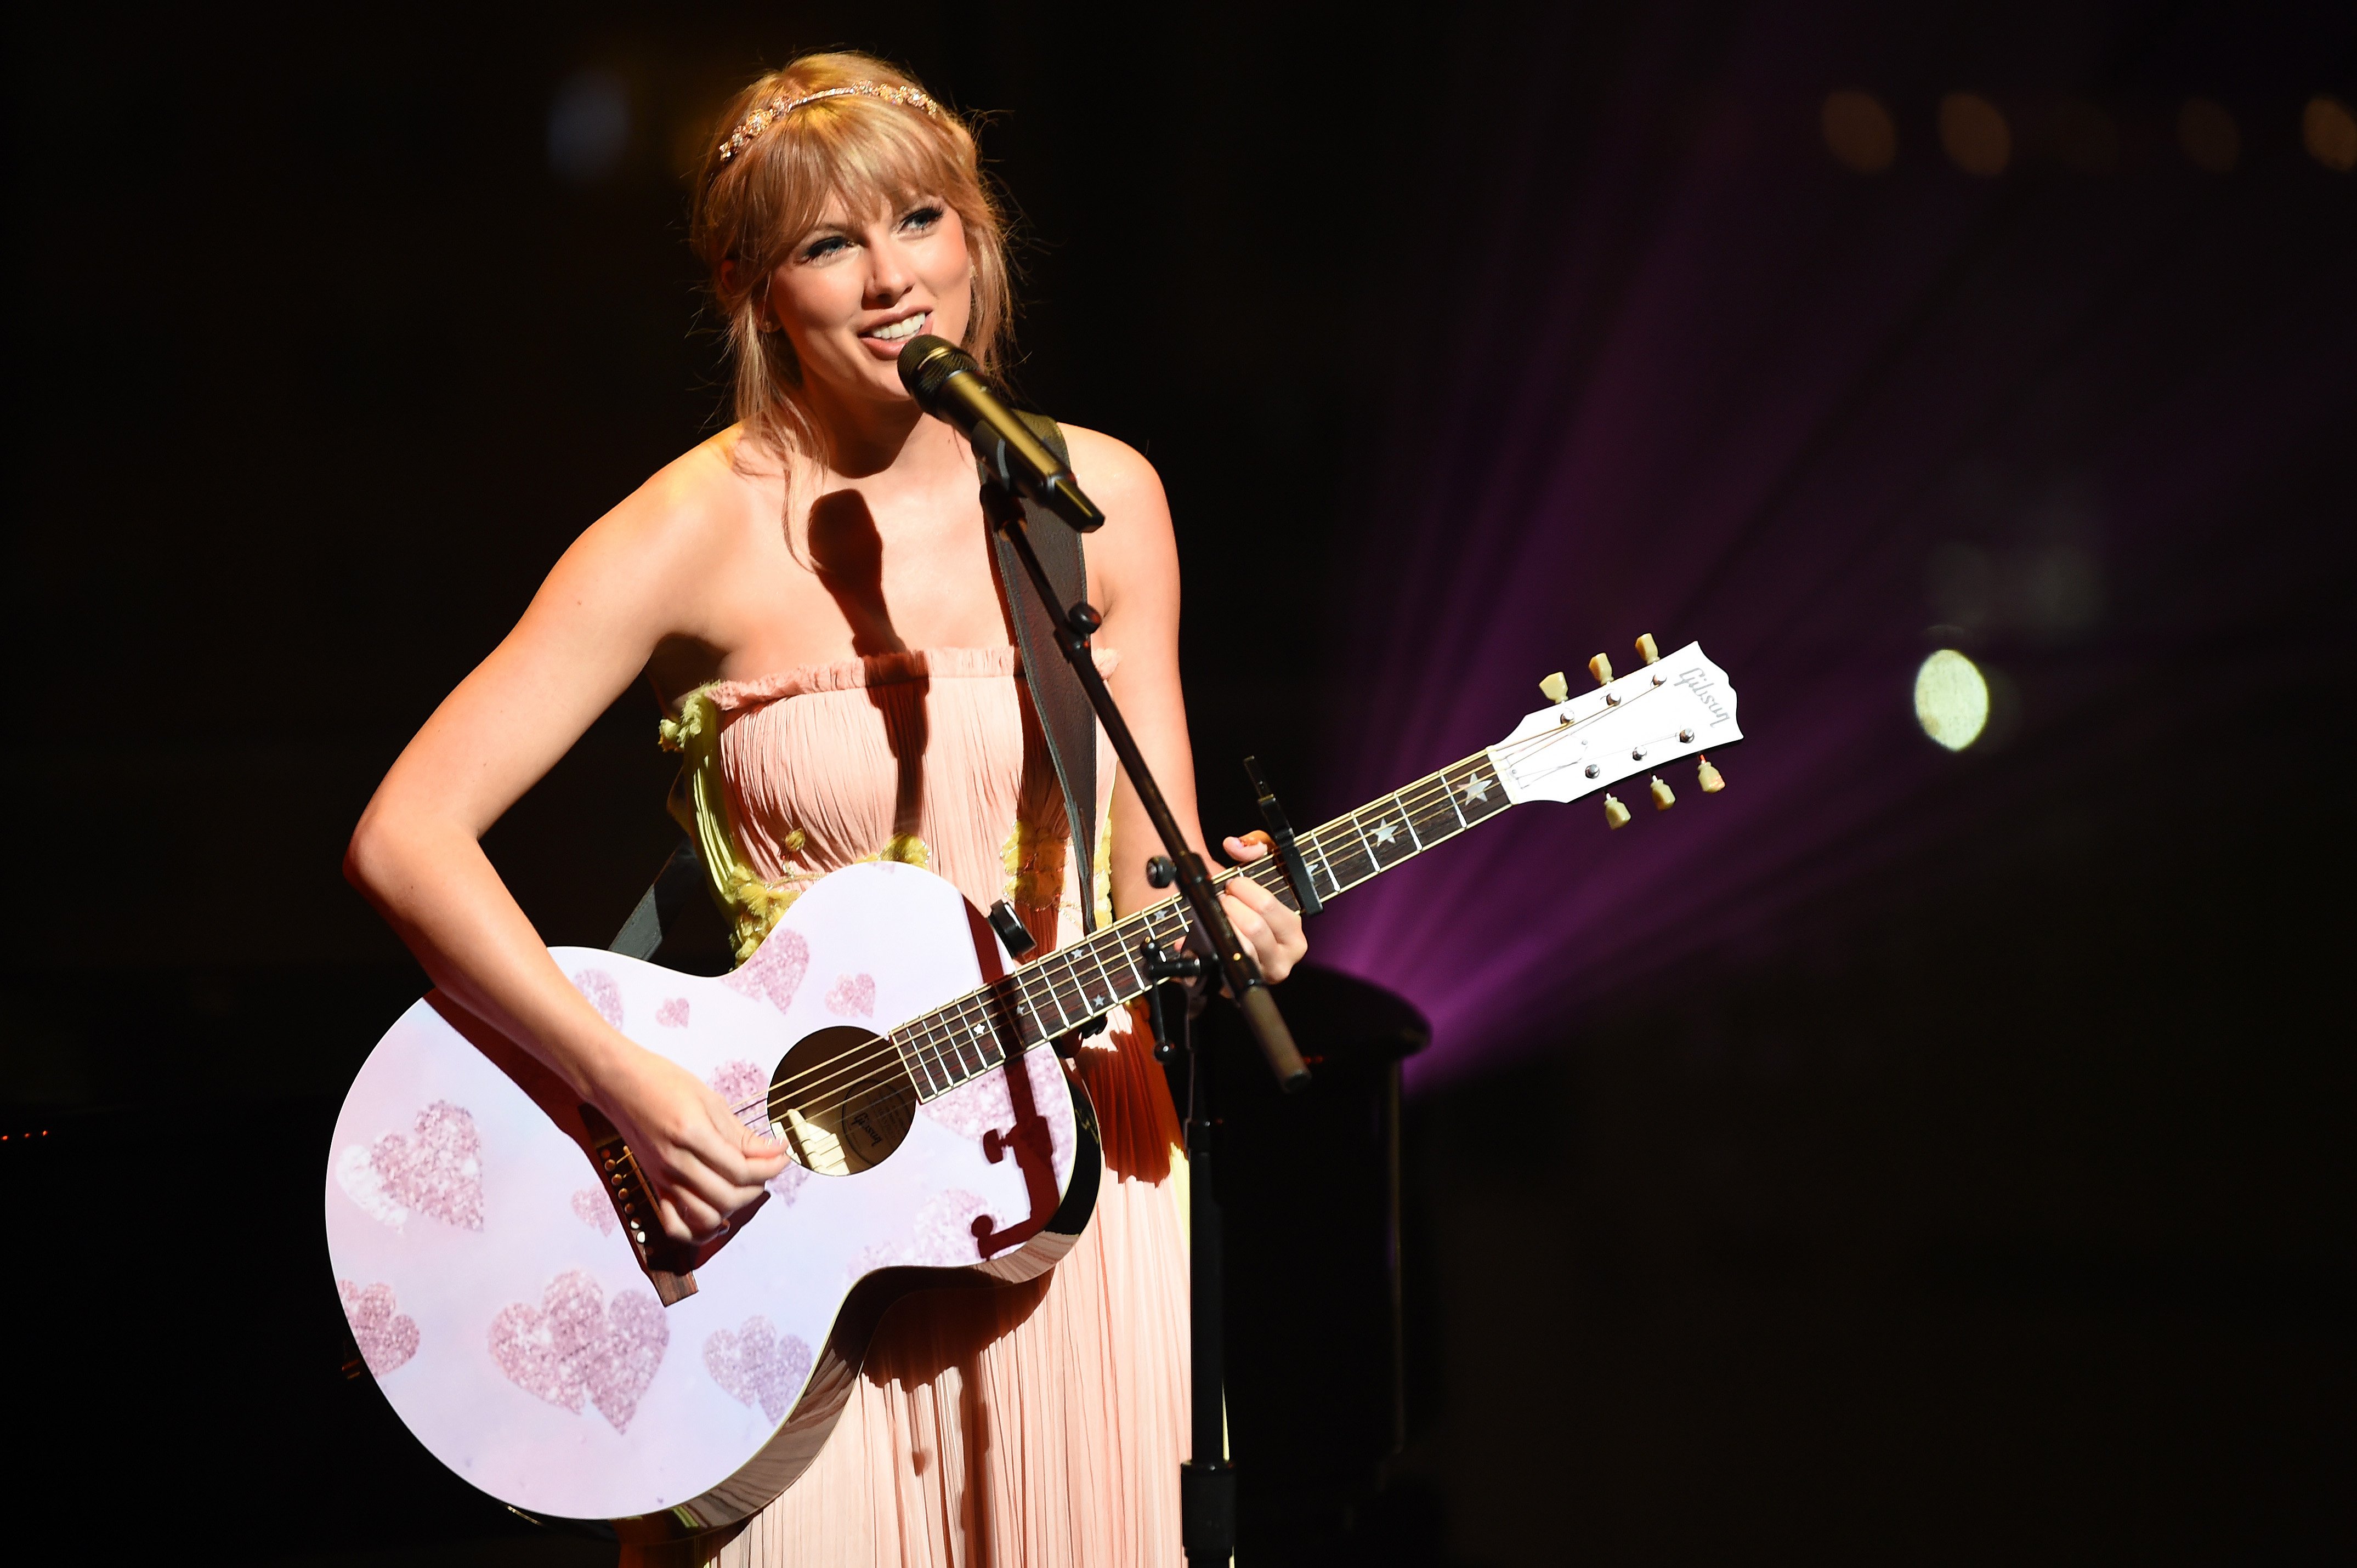 Taylor Swift holding a guitar with hearts on it as she performs at the Time 100 Gala in 2019